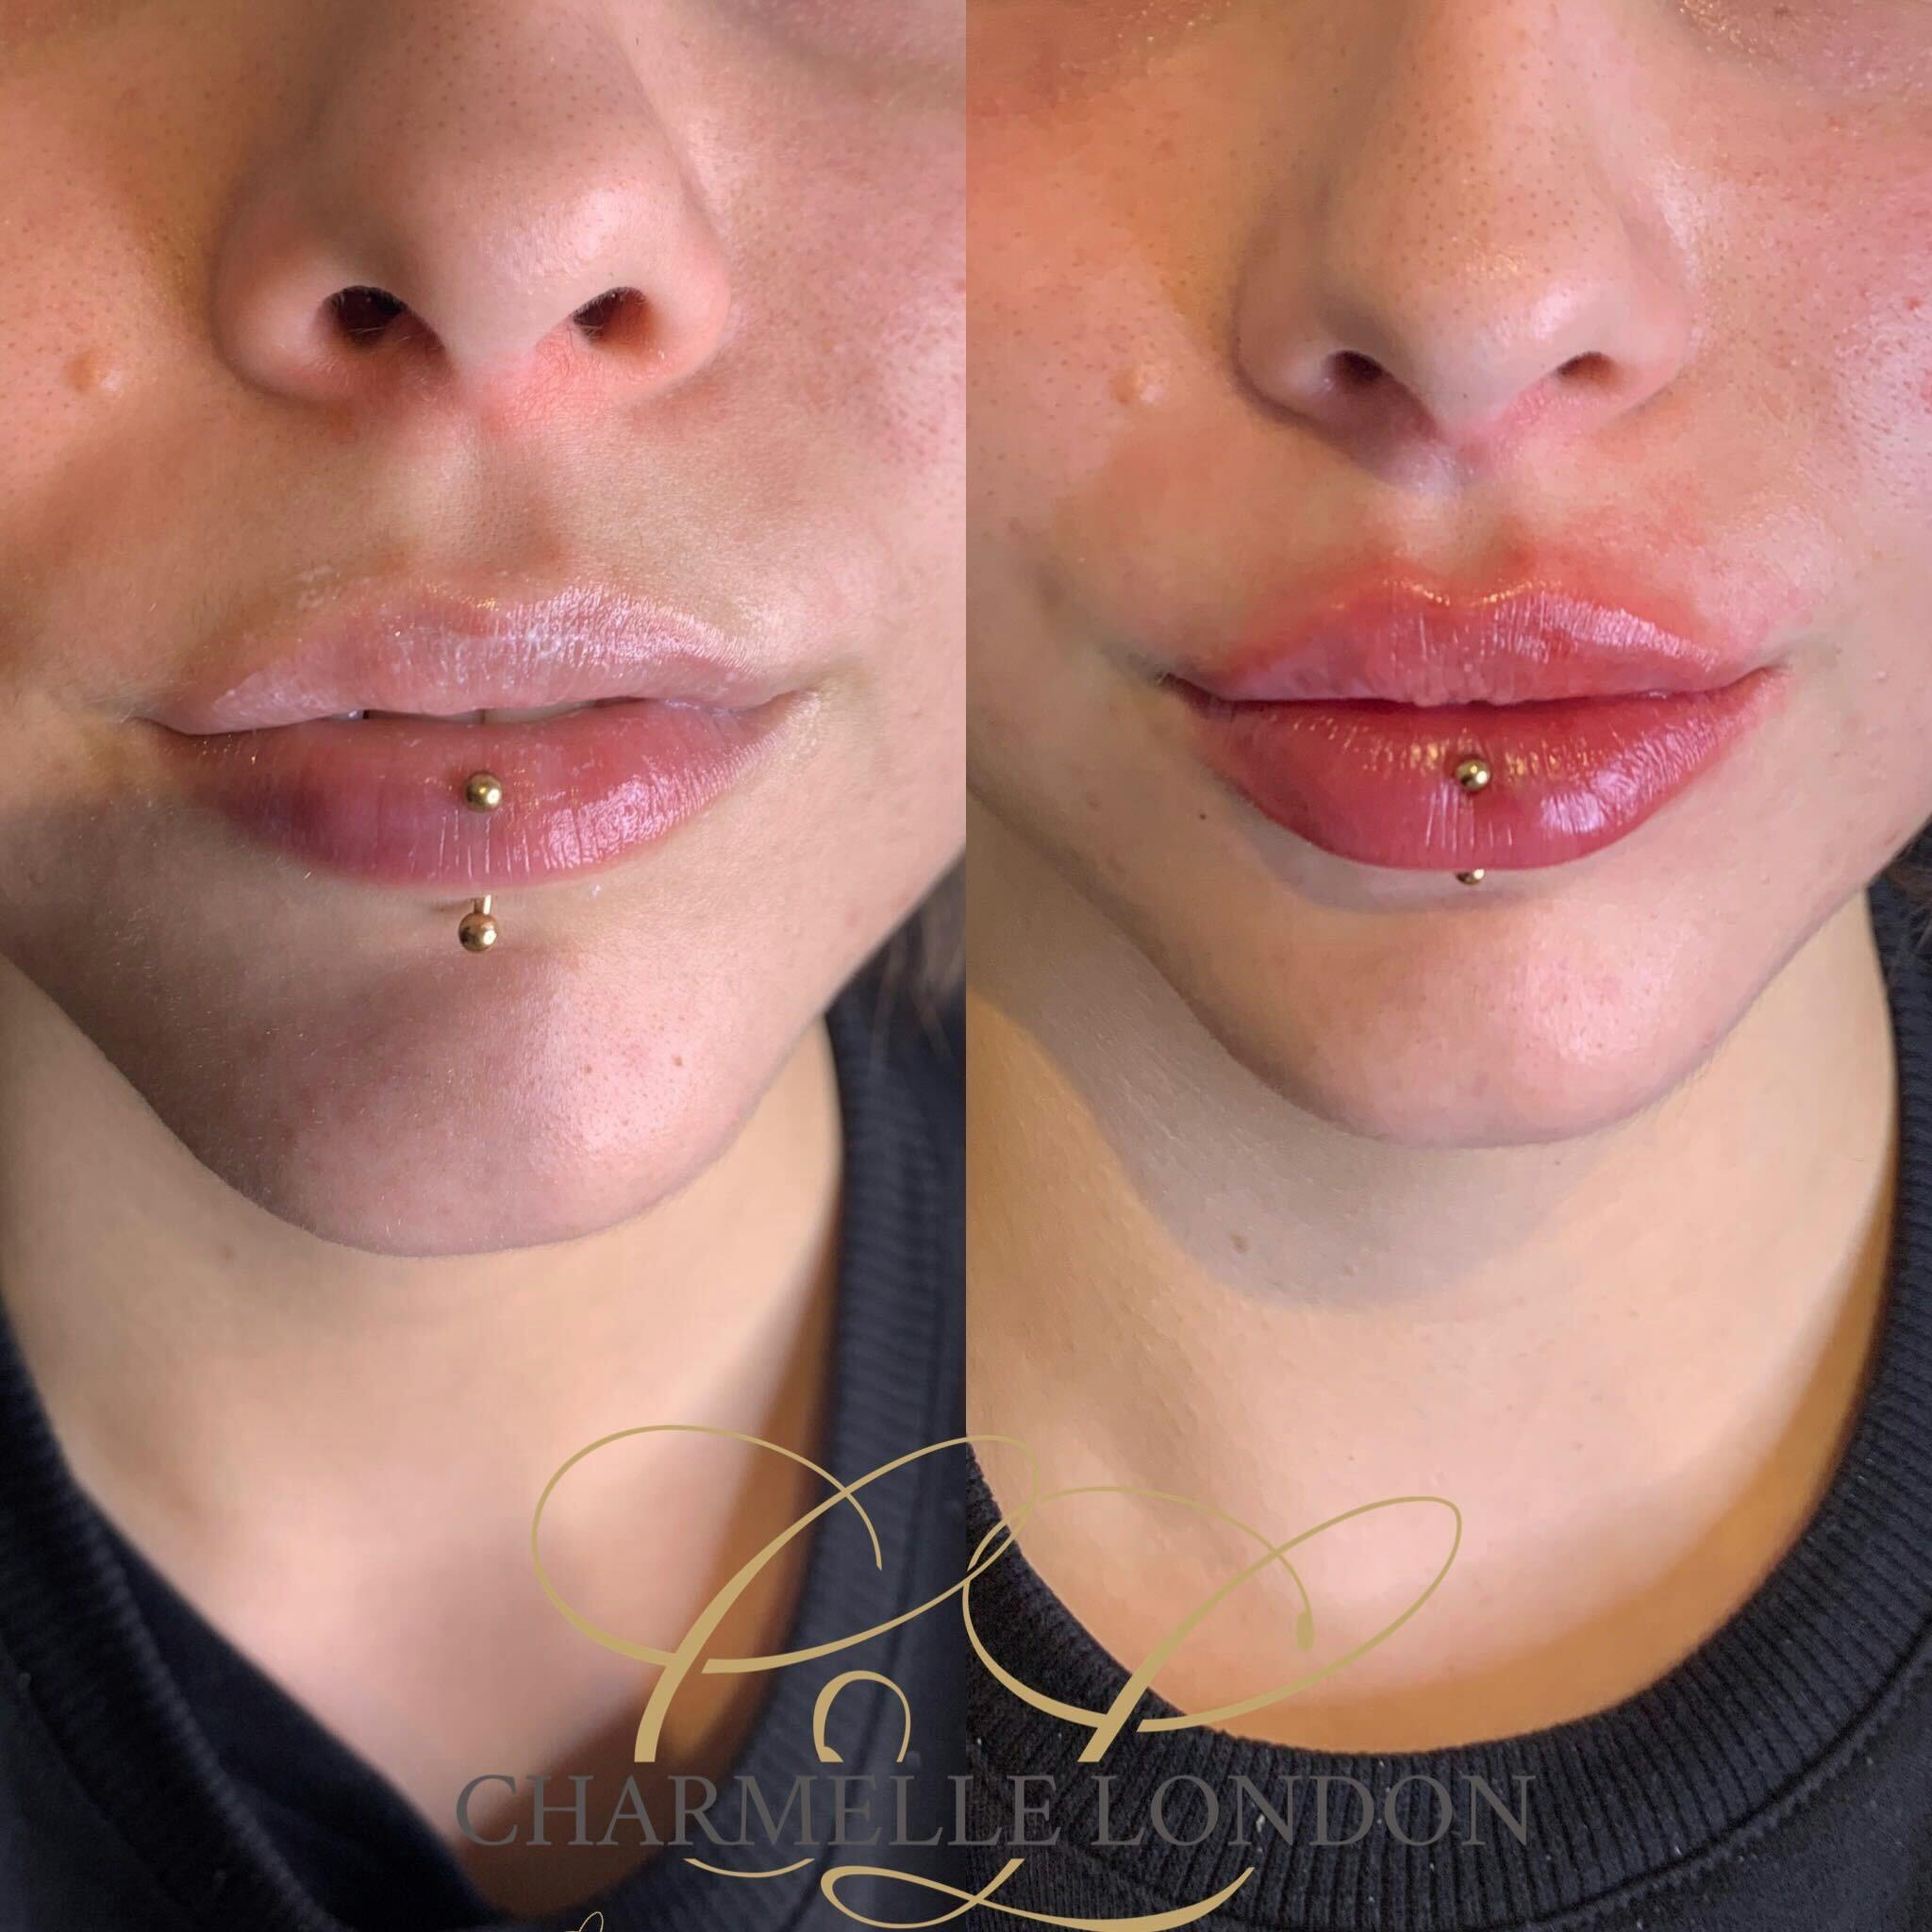 Charmelle London is one of London's leading specialists in providing subtle, natural-looking dermal filler enhancements that augment each individual’s features and introduce volume, hydration and defintion.

The passion of our specialists at Charmelle London is to deliver complete satisfaction to each and every client. Many of our clients we see routinely to keep their lips looking fabolously maintained.